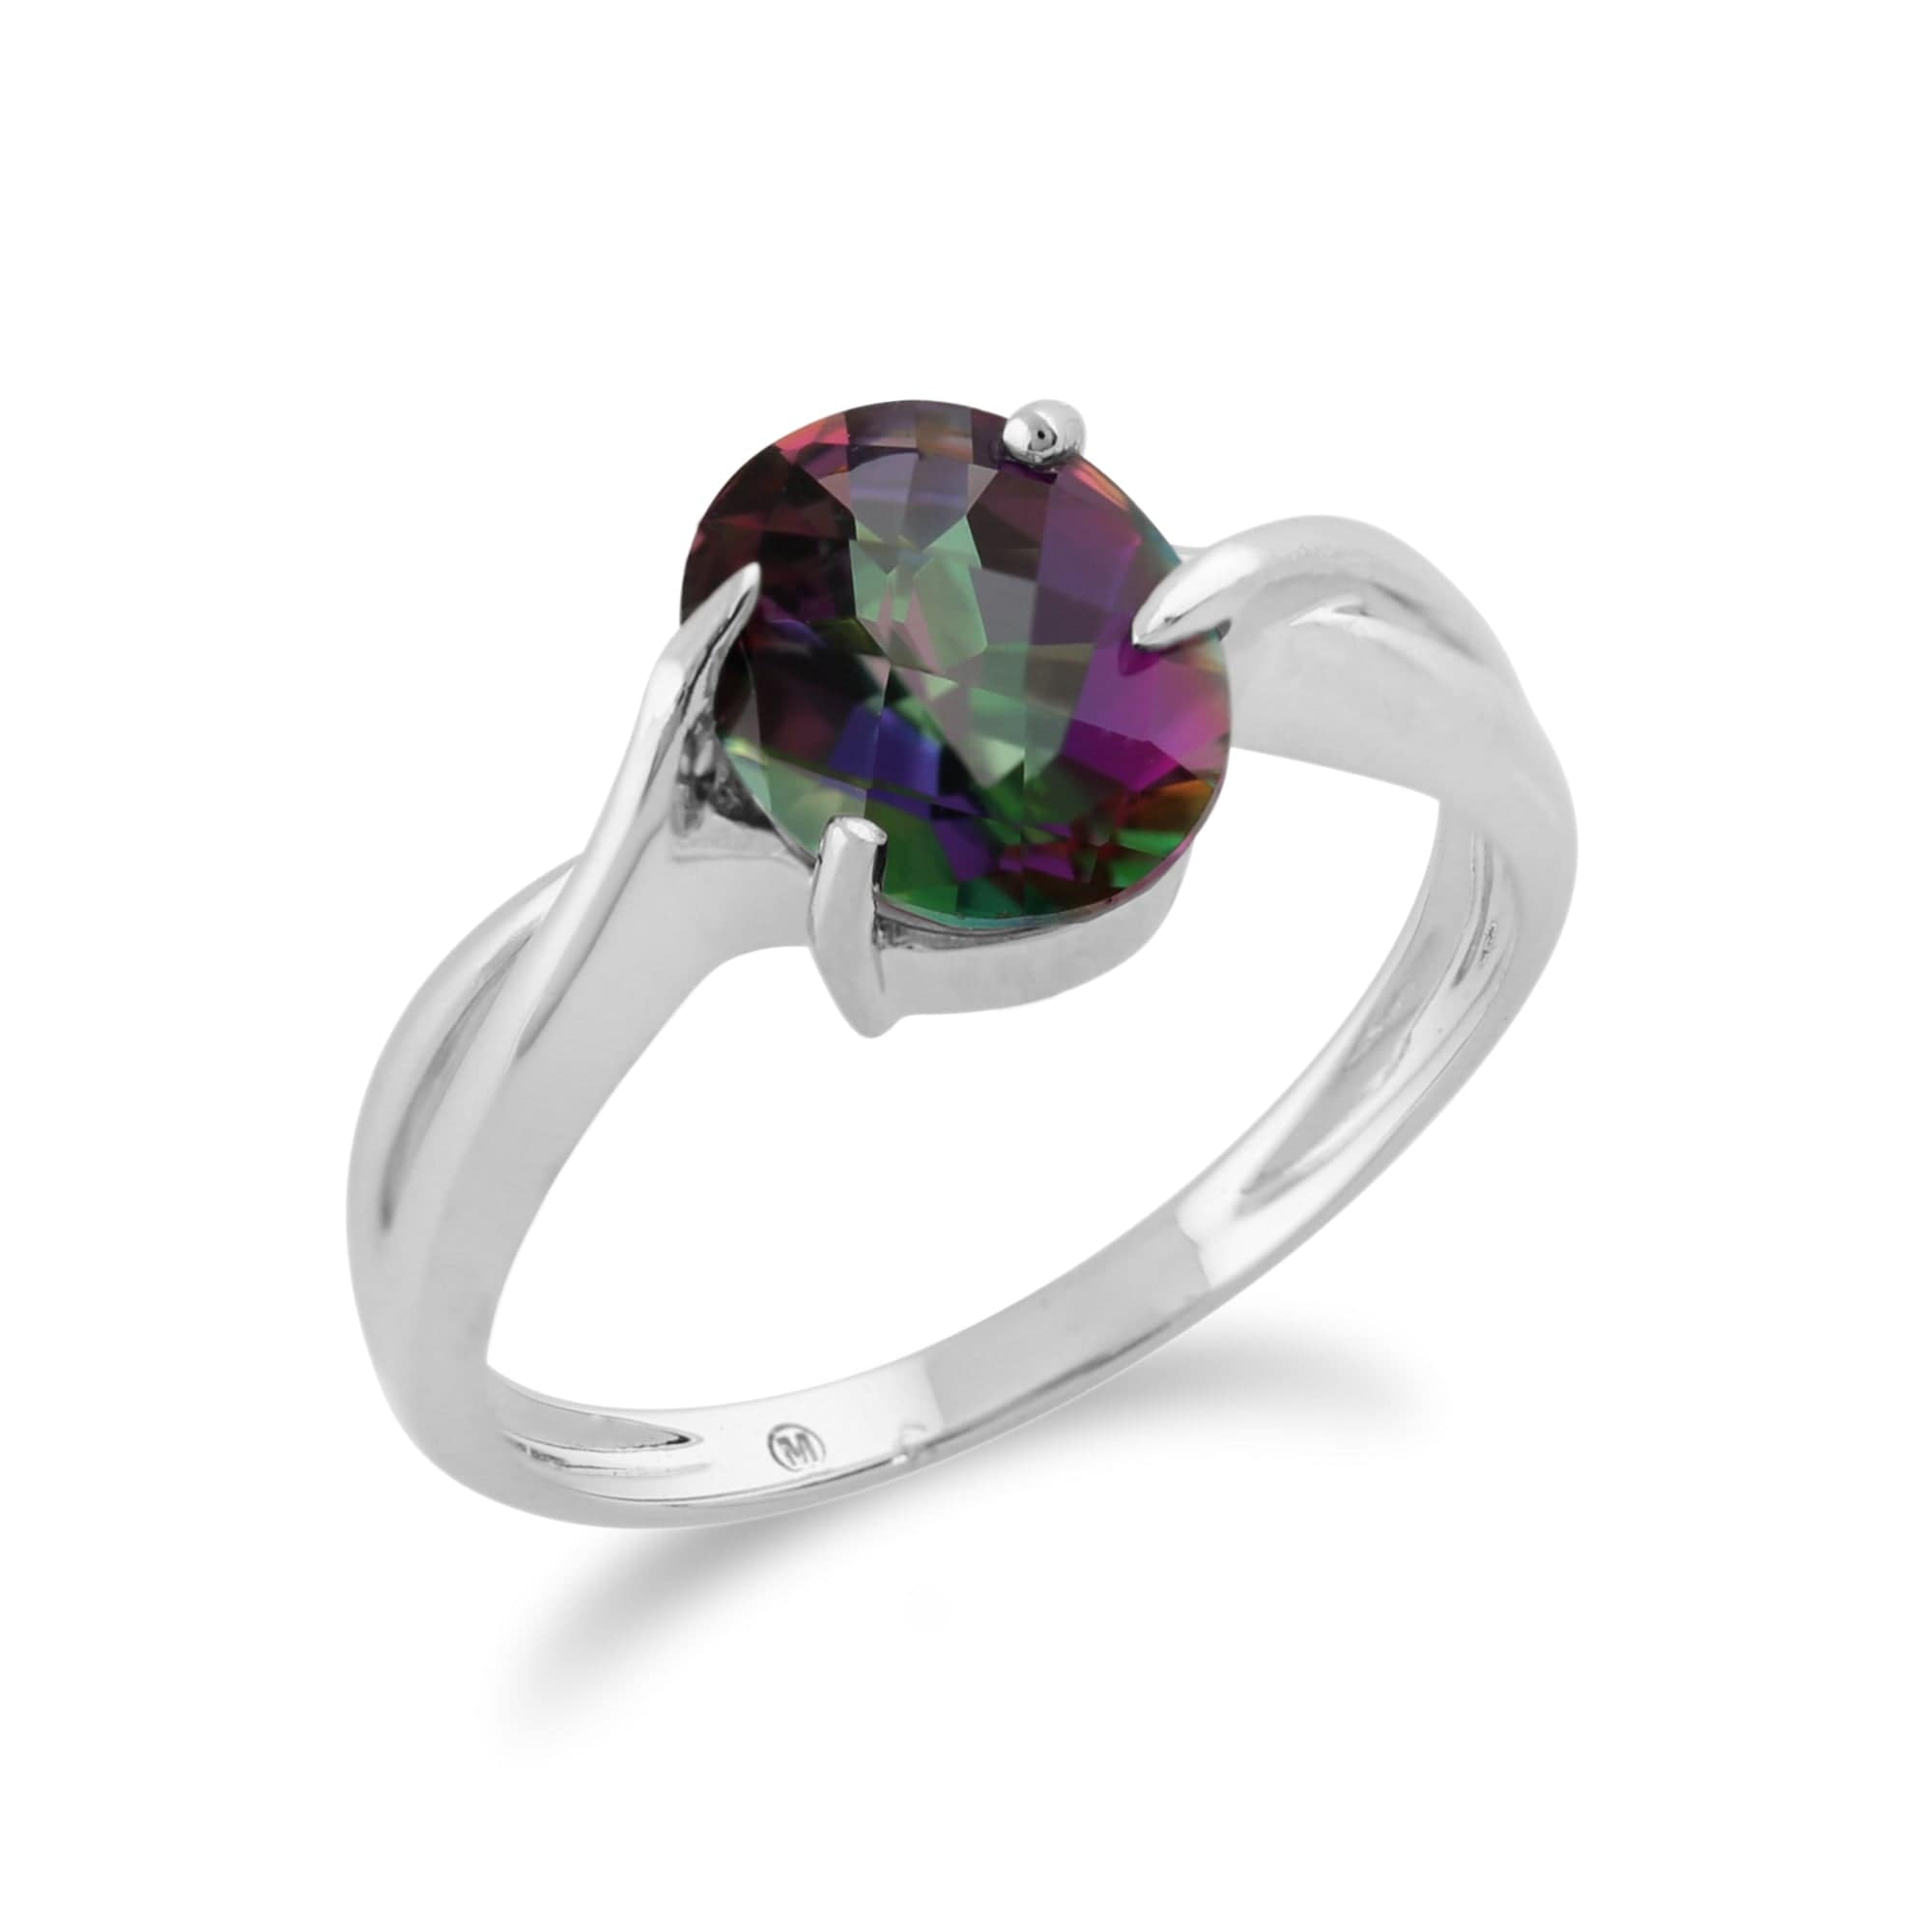 9ct White Gold 2.00ct Oval Cut Mystic Topaz Classic Single Stone Ring Image 2